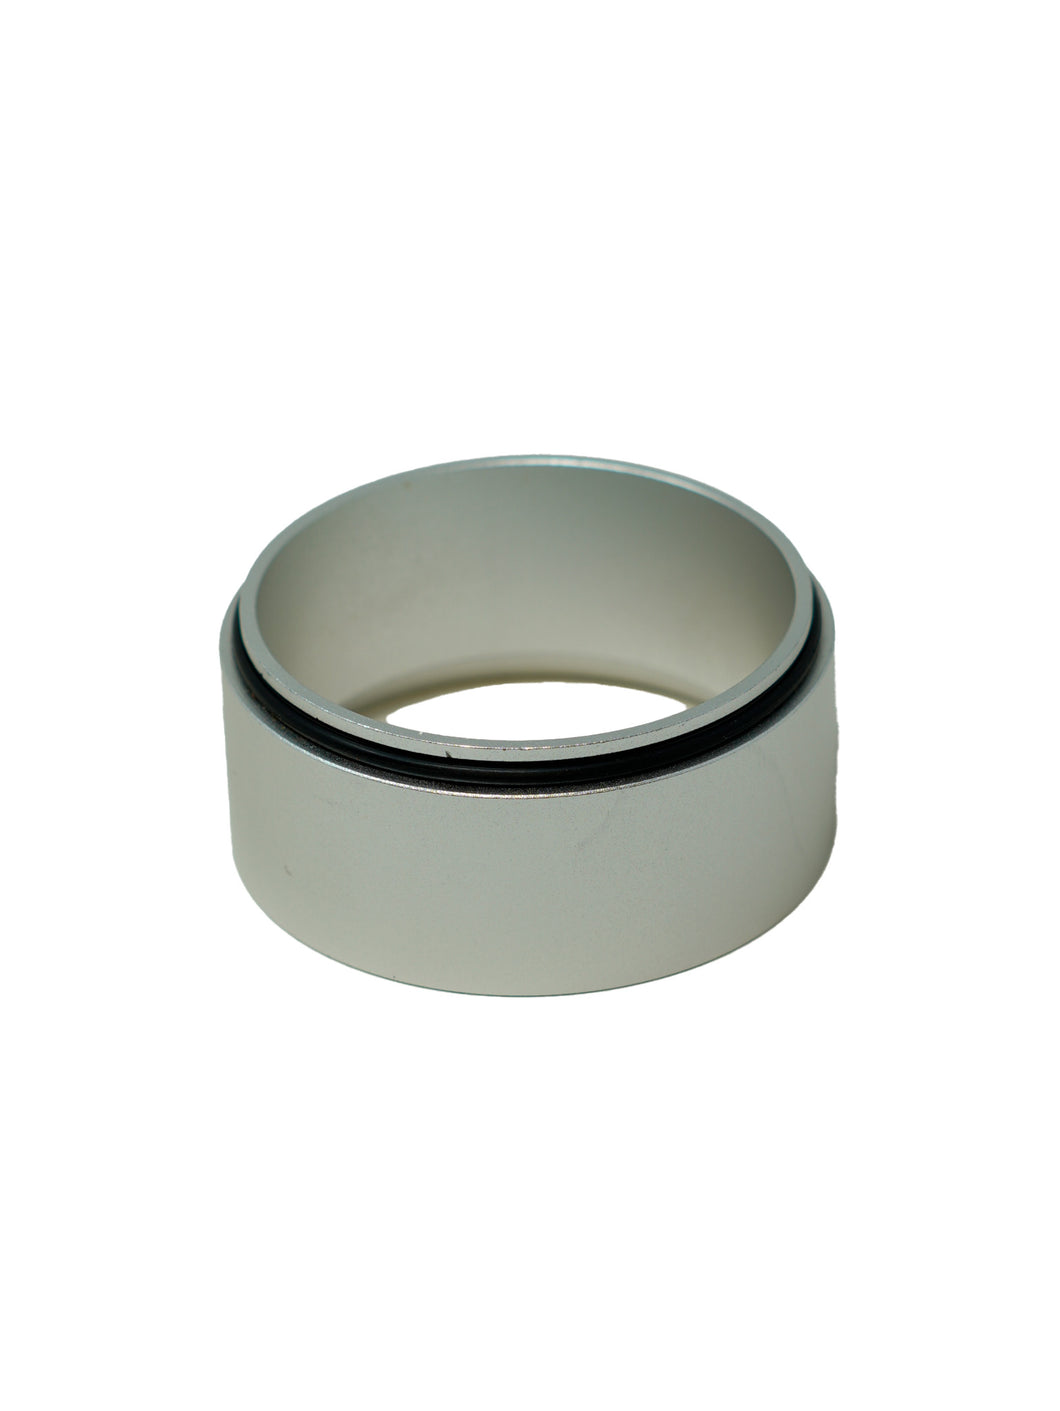 58MM METAL DOSING COLLAR FOR THE TURIN DF64 GRINDER